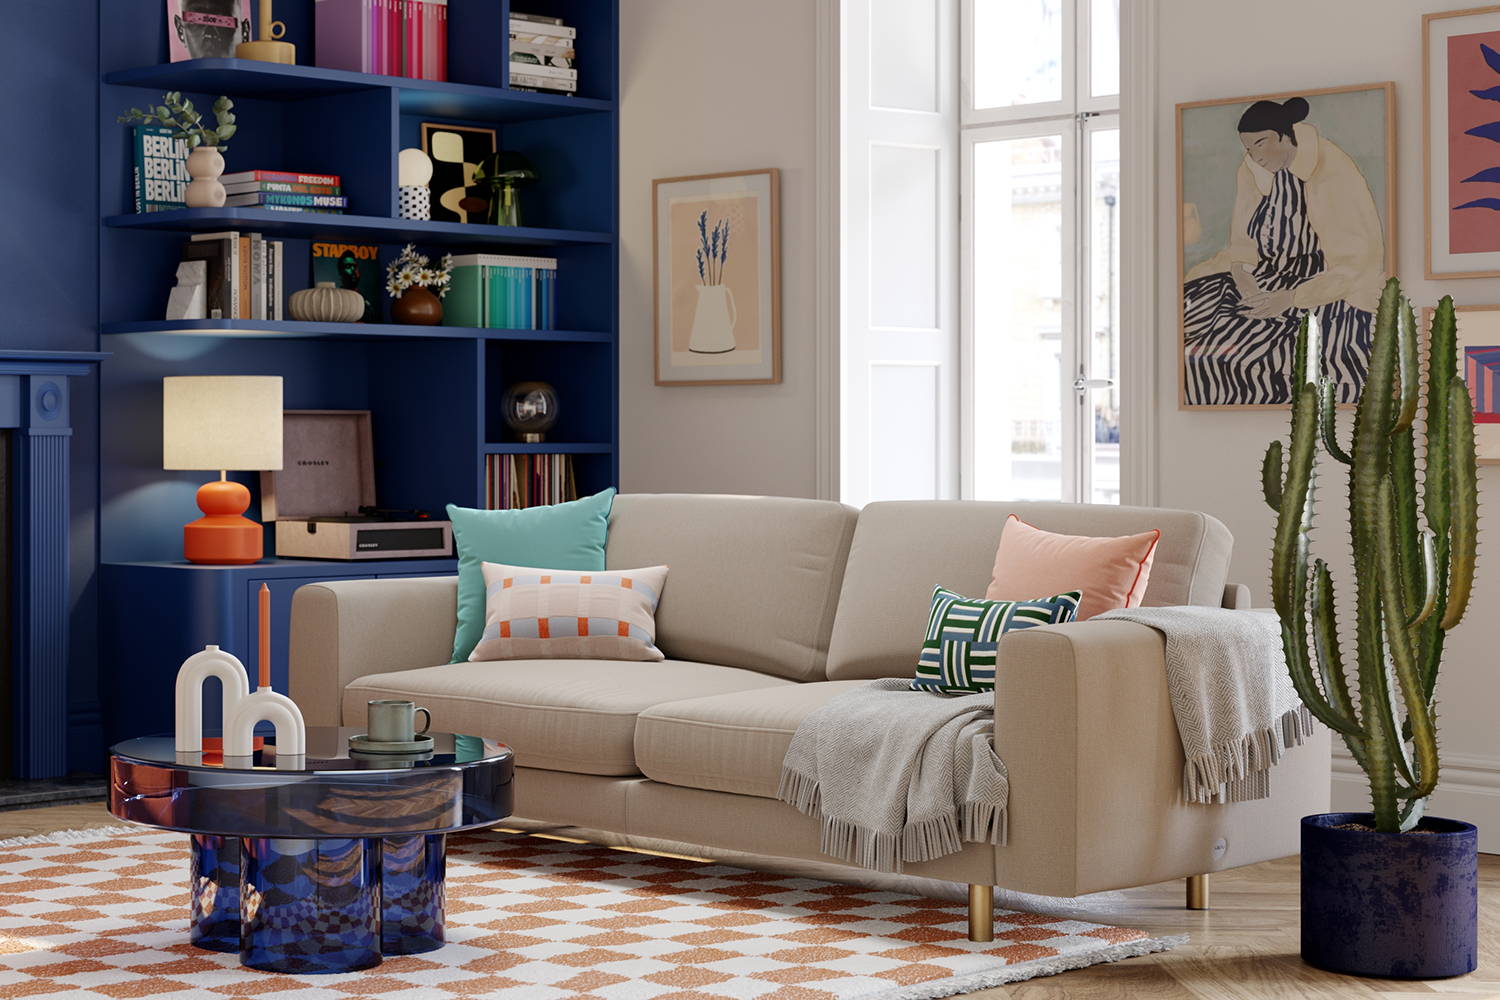 Neutral colour sofa with blue statement wall and colourful decor